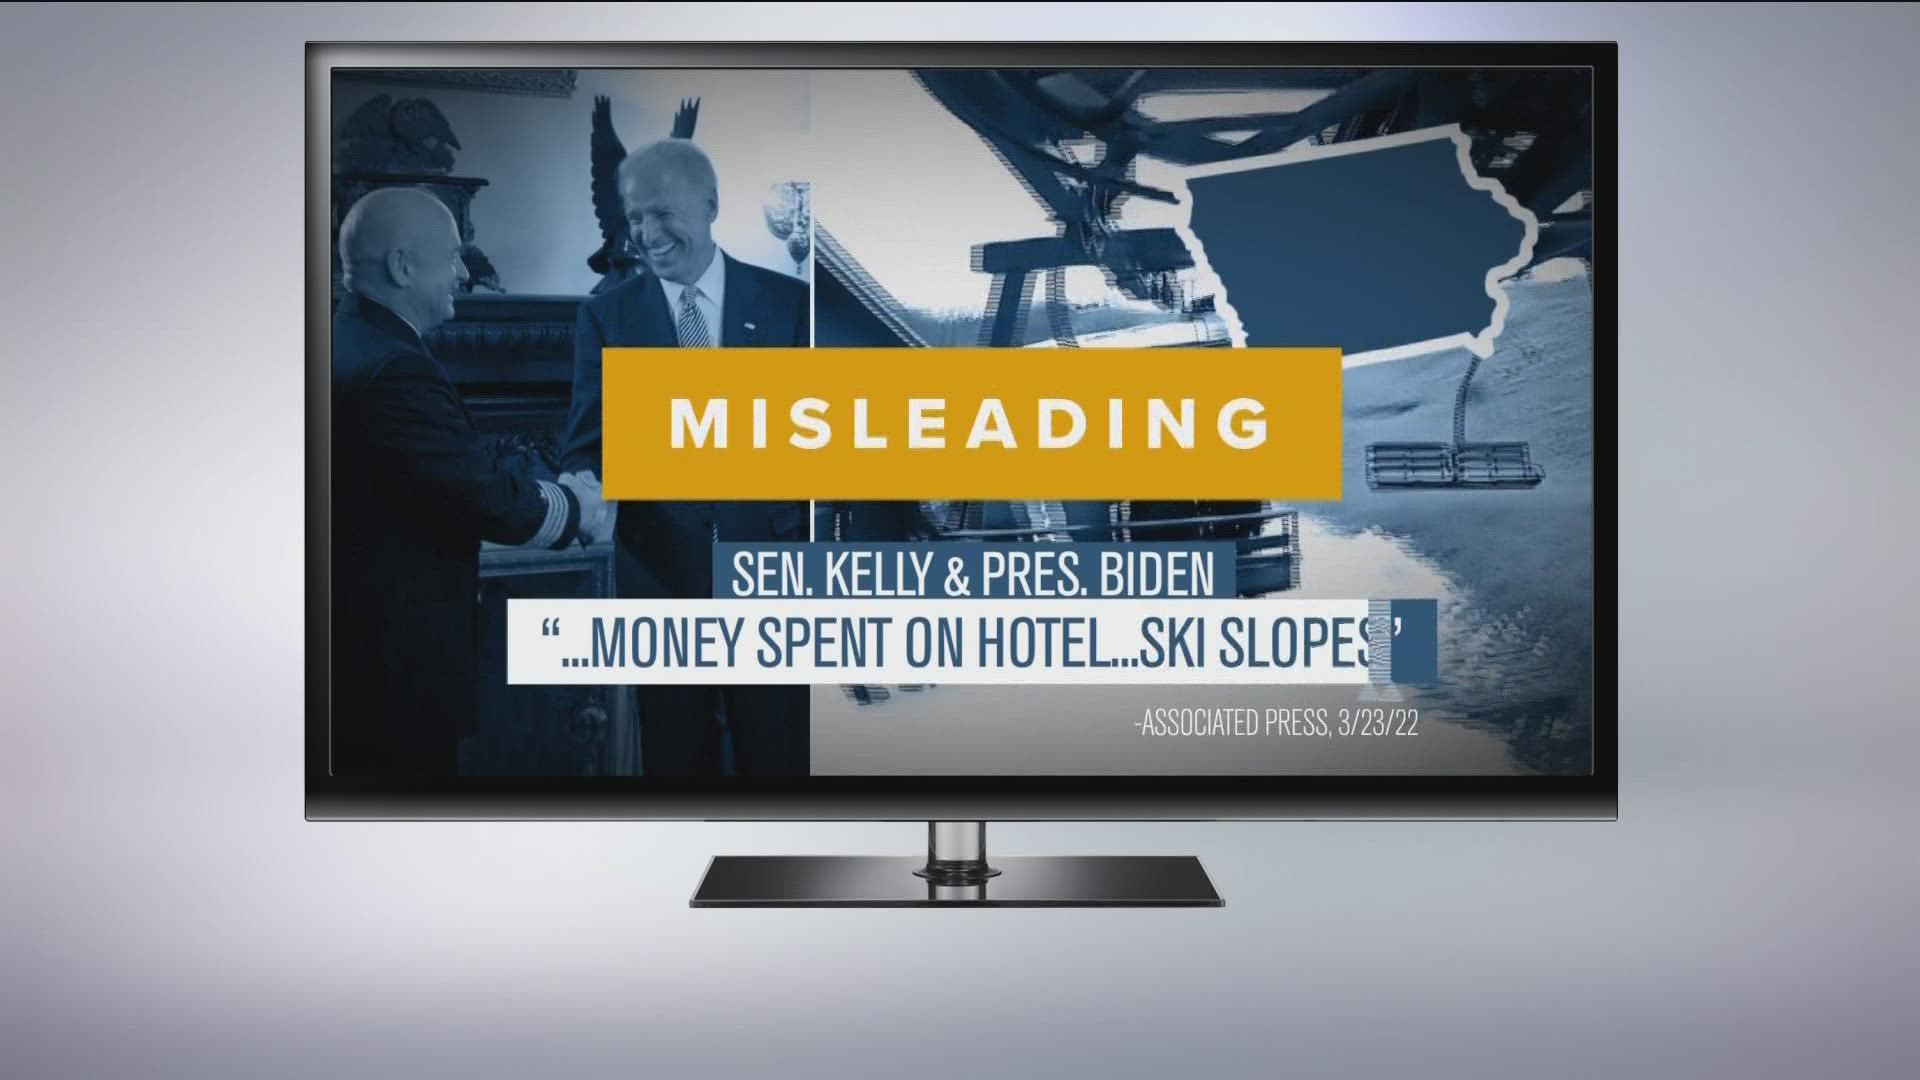 In TV ad, a claim is made against Mark Kelly regarding reckless spending in the Senate.